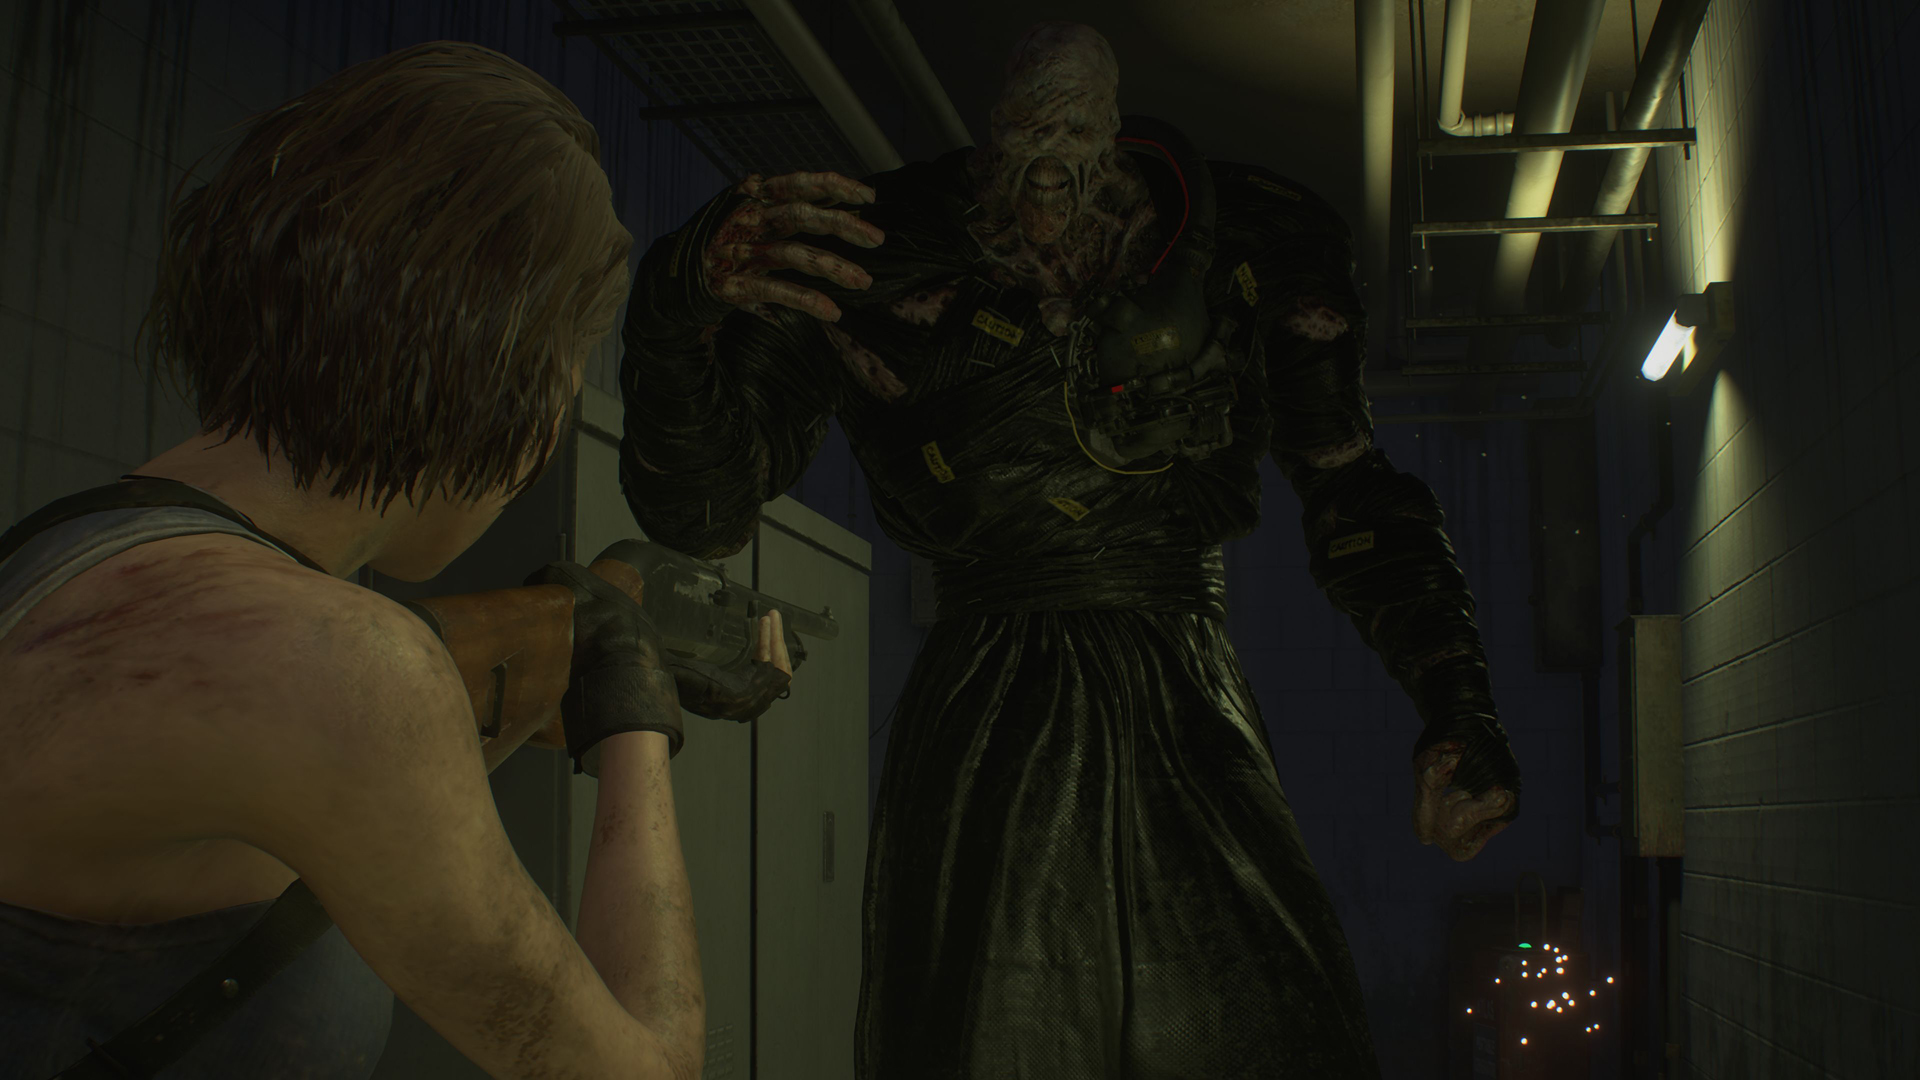 All Resident Evil 3 weapons, upgrades and attachments